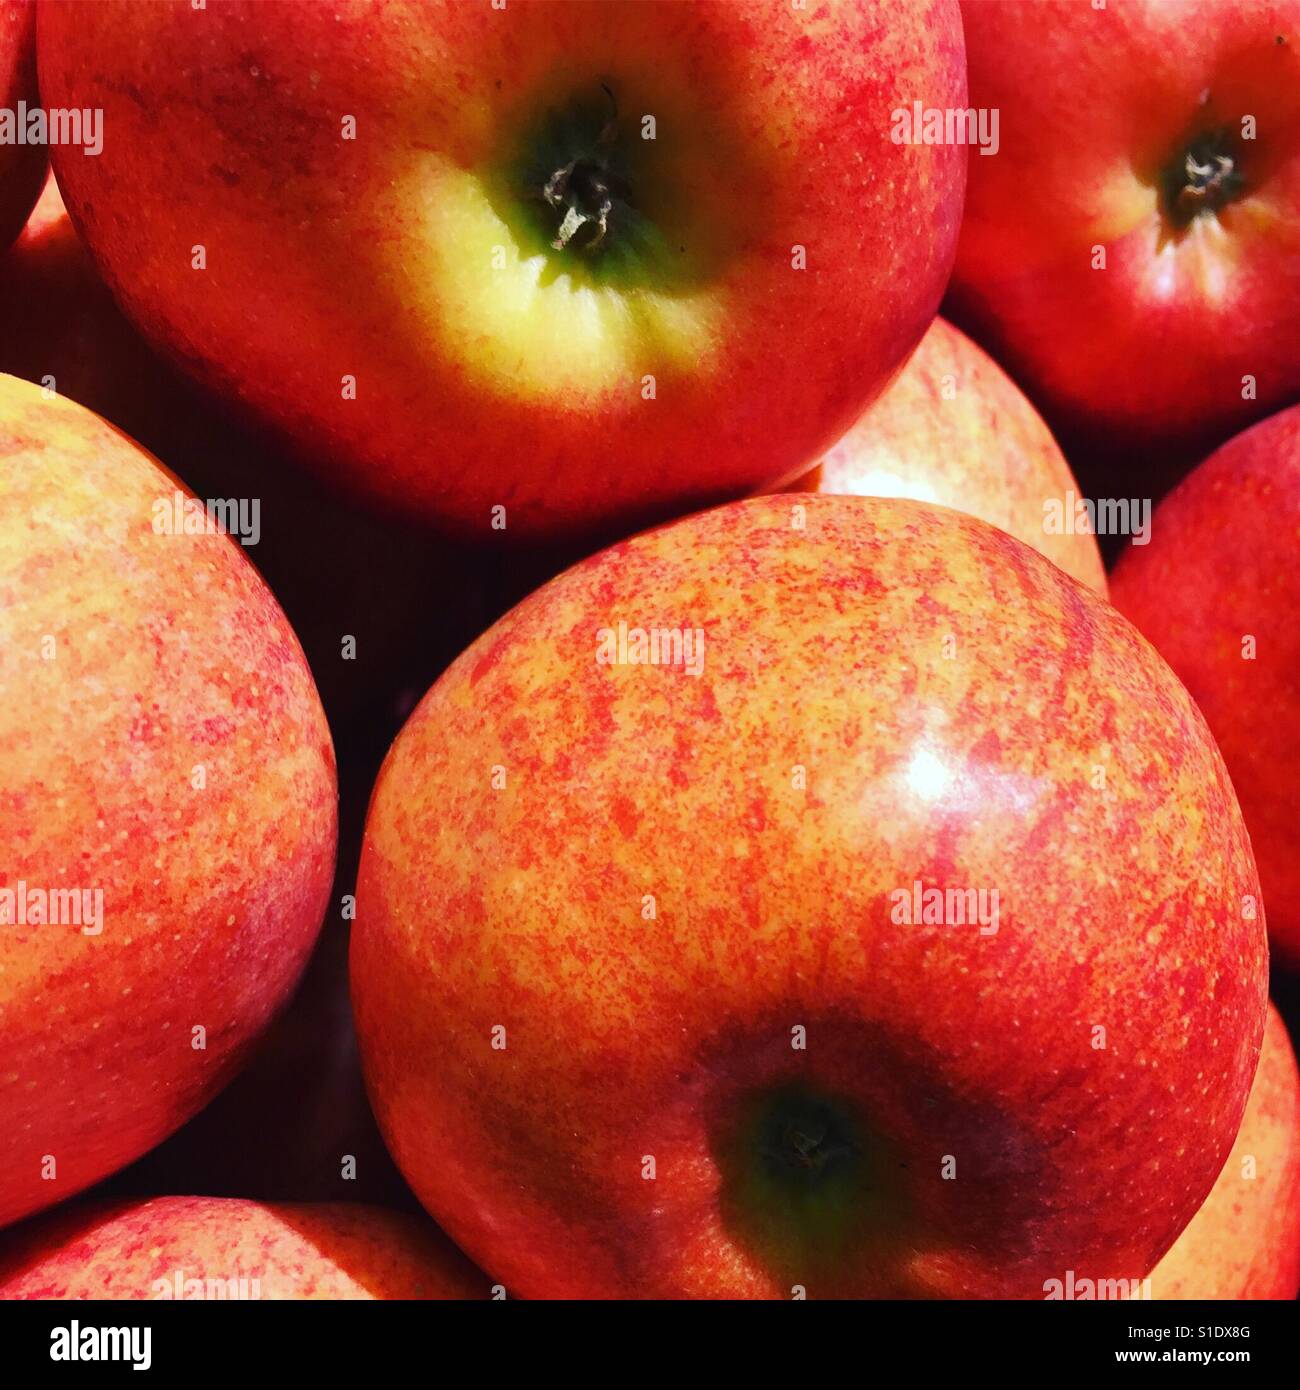 Fresh apples by K.R. Stock Photo